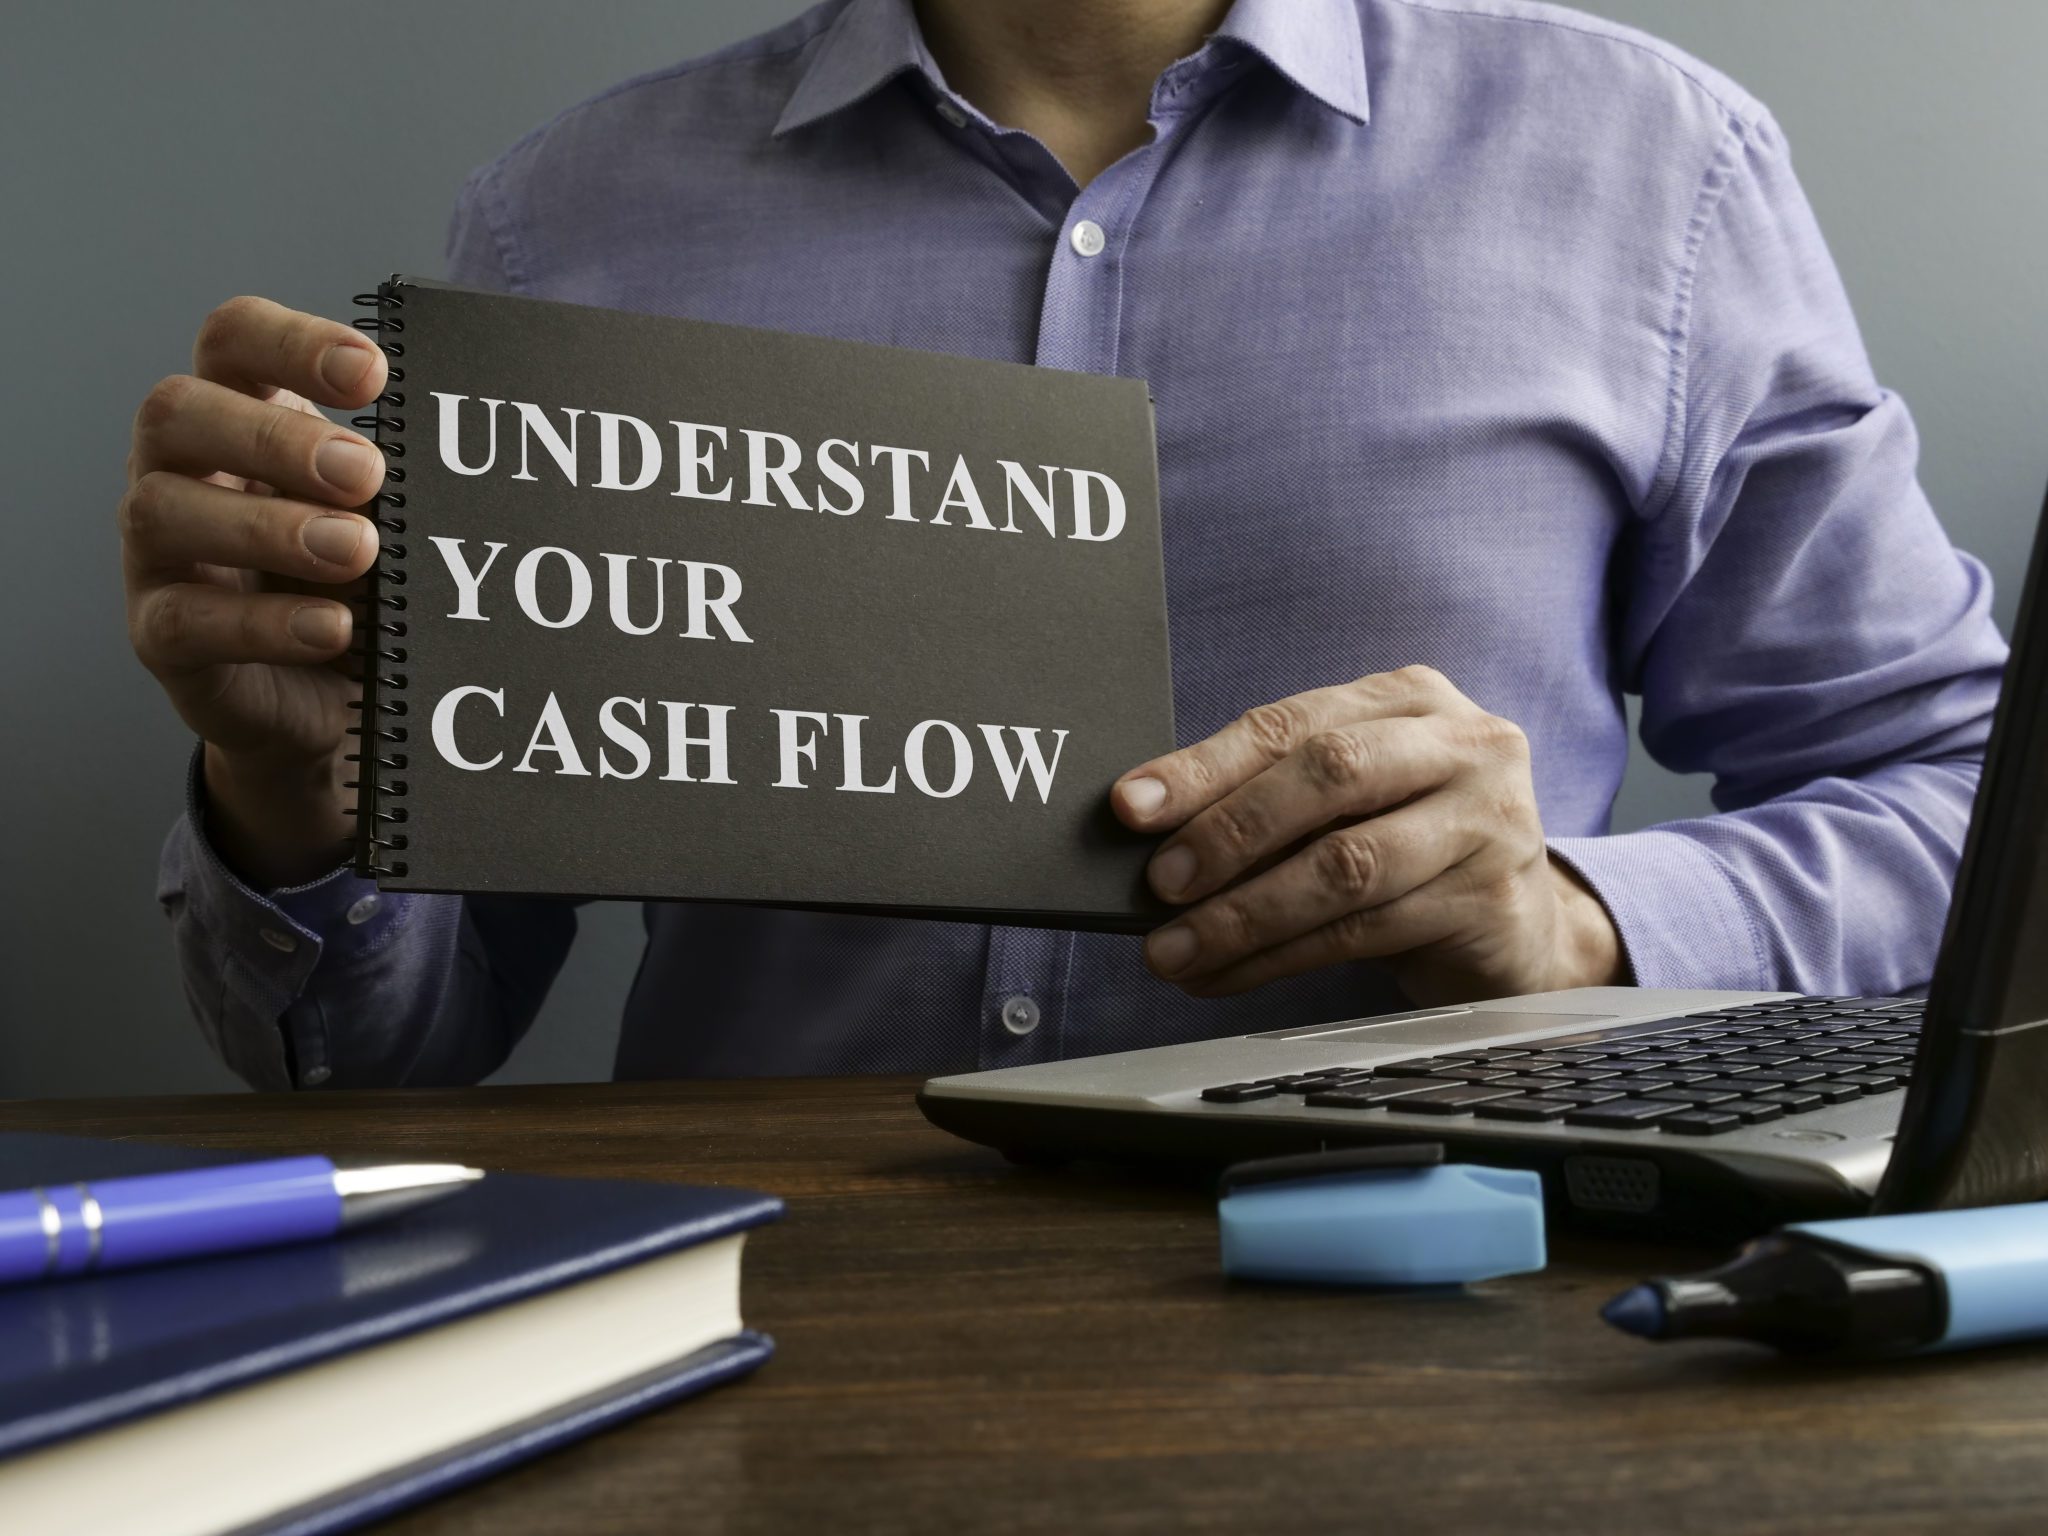 Help with Business Cash Flow Issues